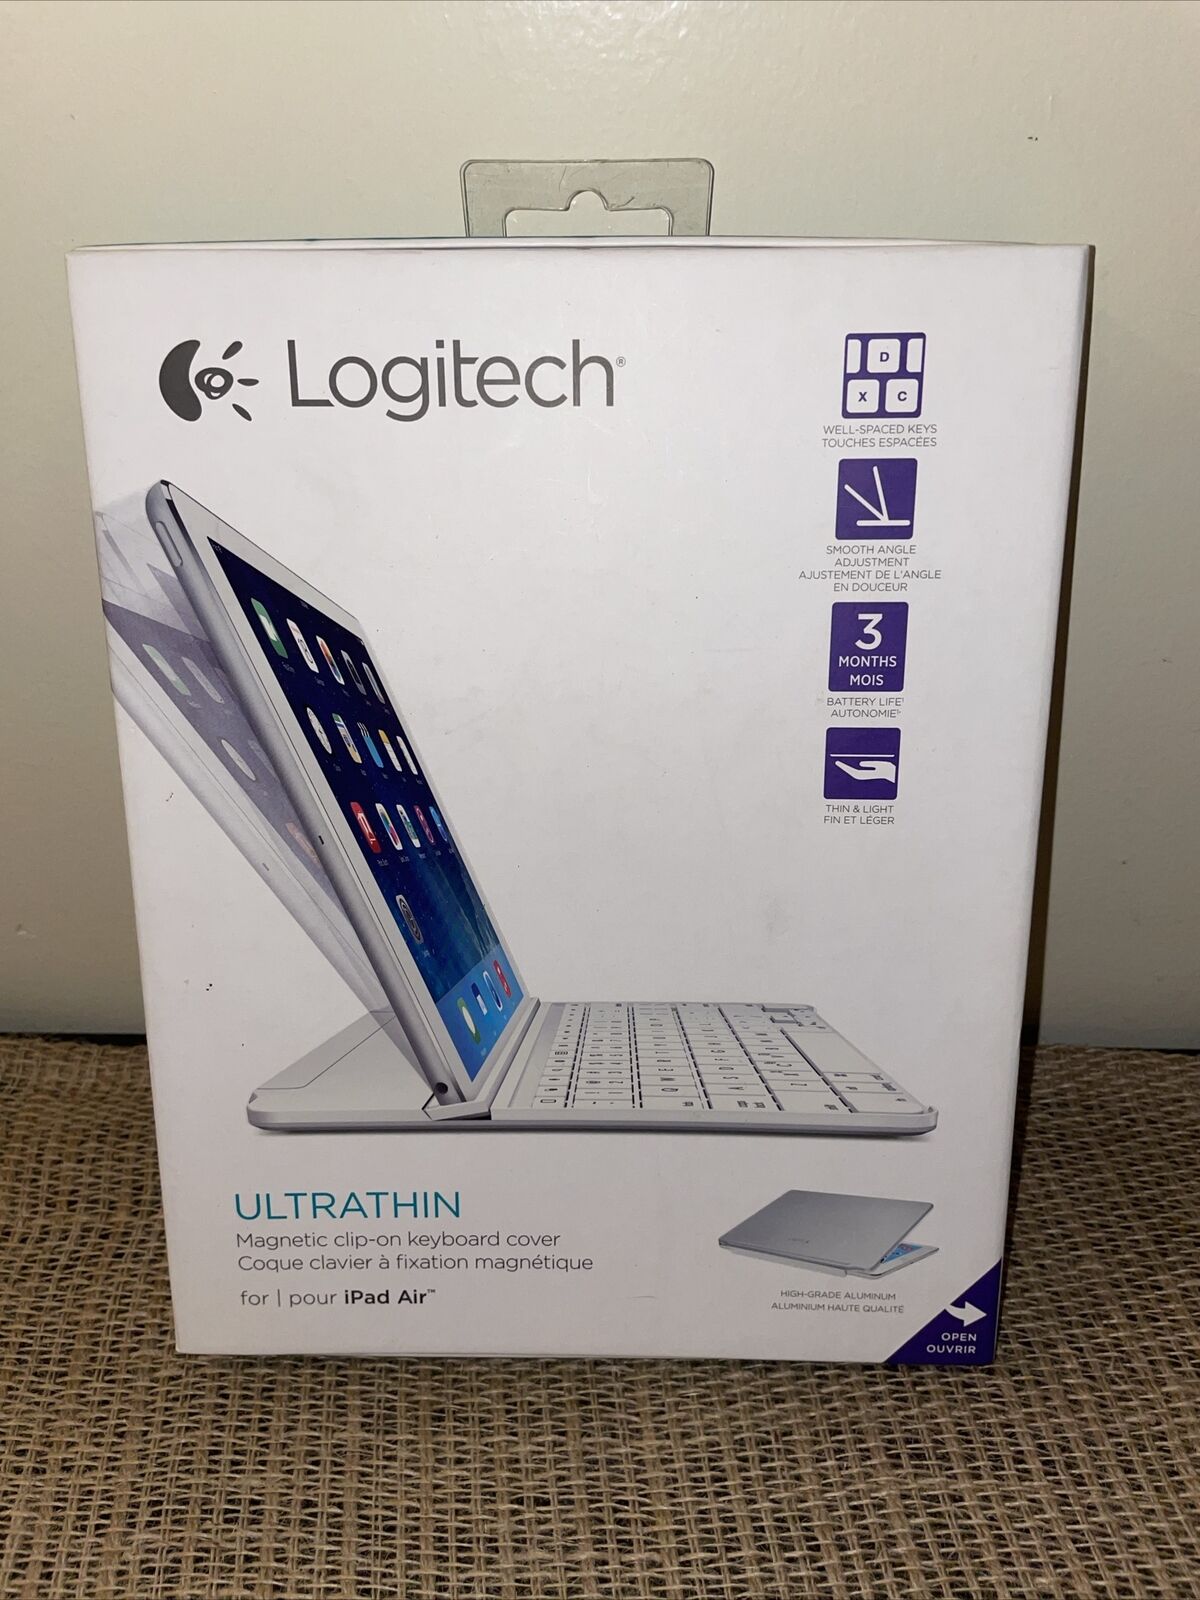 New Logitech Ultrathin Apple iPad Air Magnetic Clip On Keyboard Cover Case